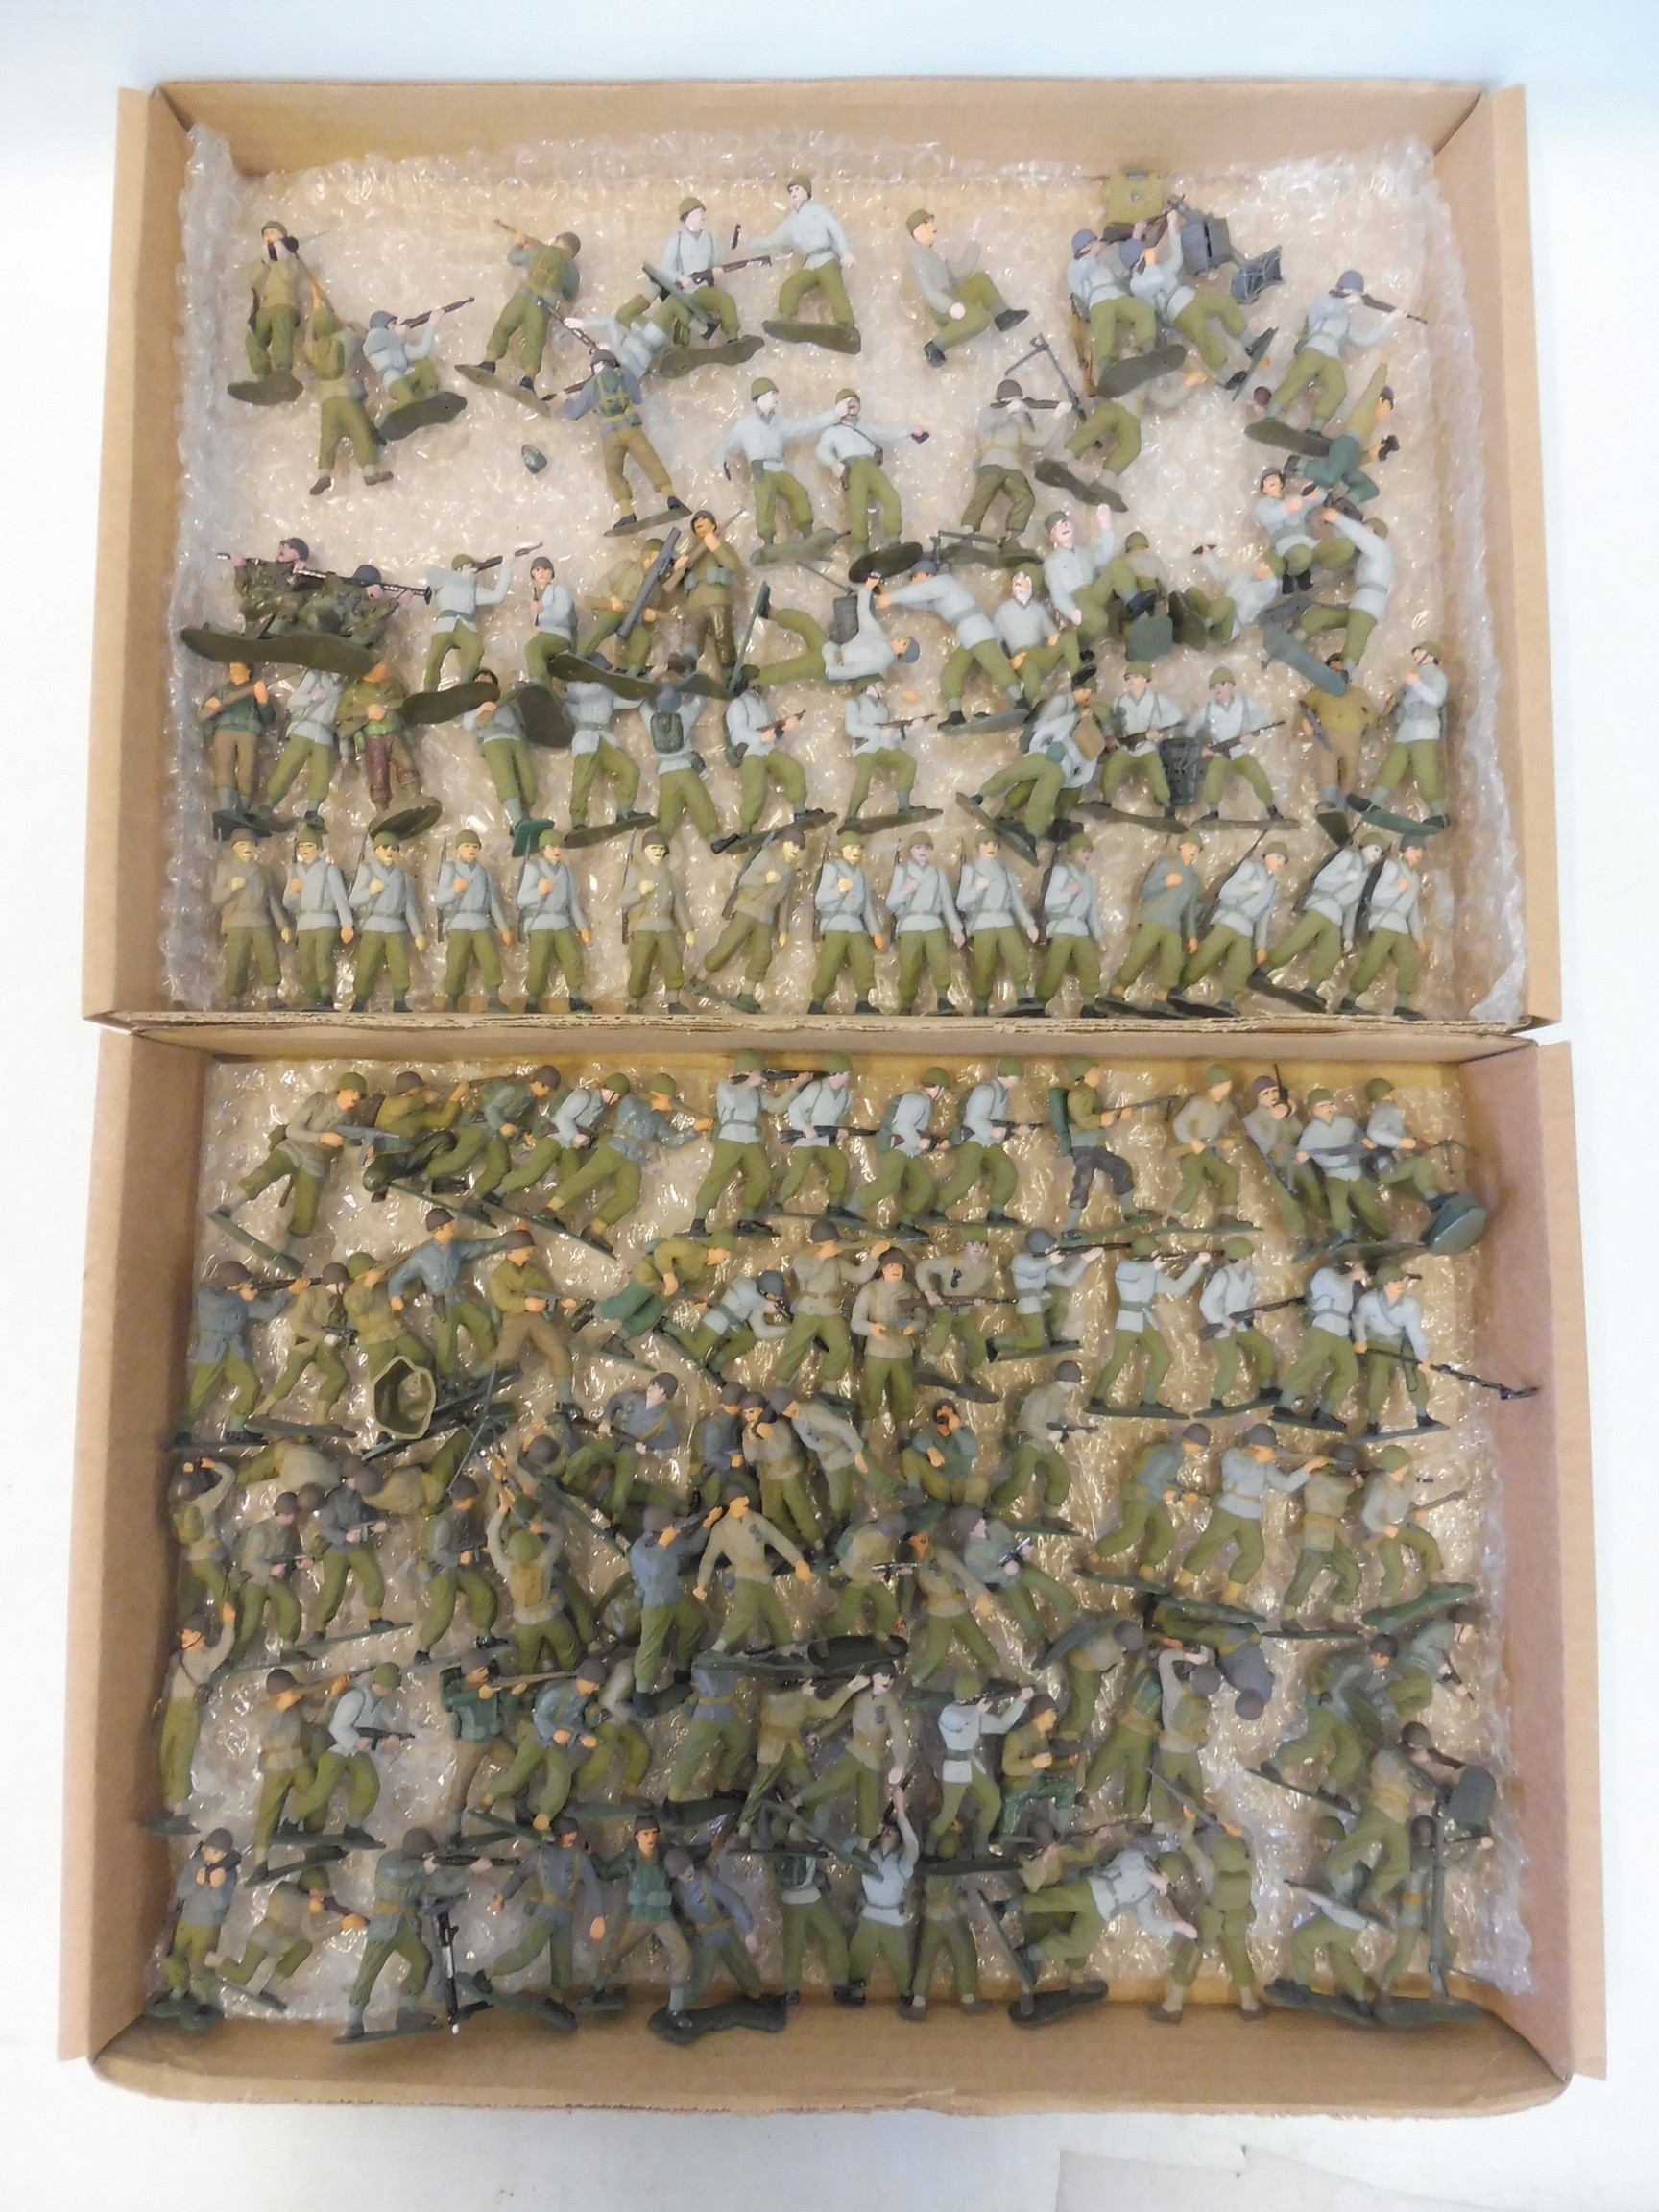 Two trays of WWII era Russian soldiers.